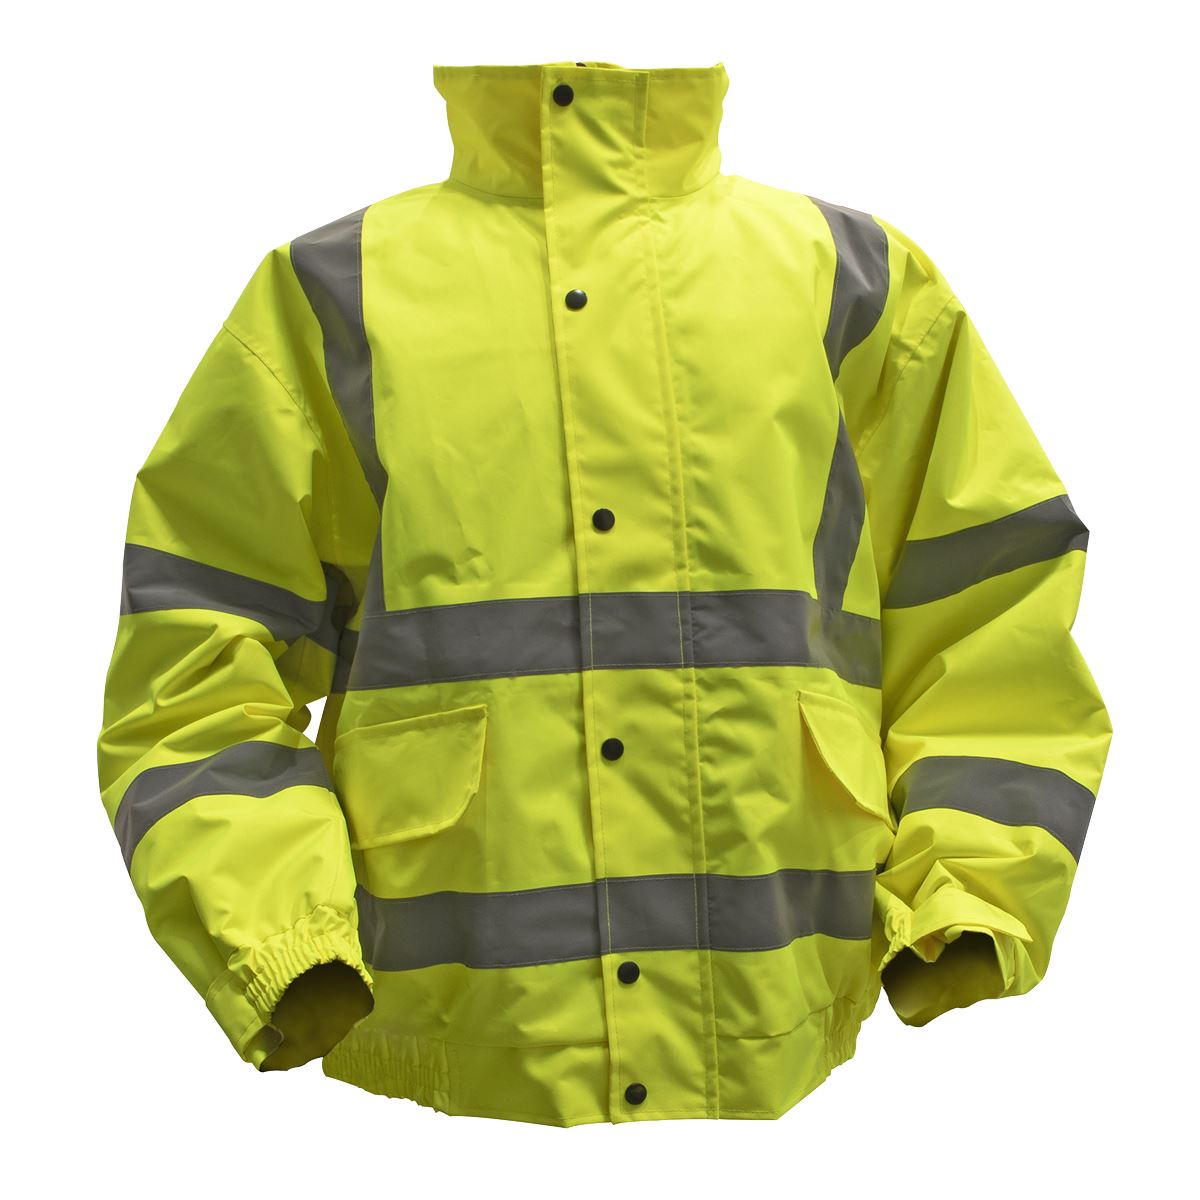 Worksafe by Sealey Hi-Vis Yellow Jacket with Quilted Lining & Elasticated Waist - X-Large